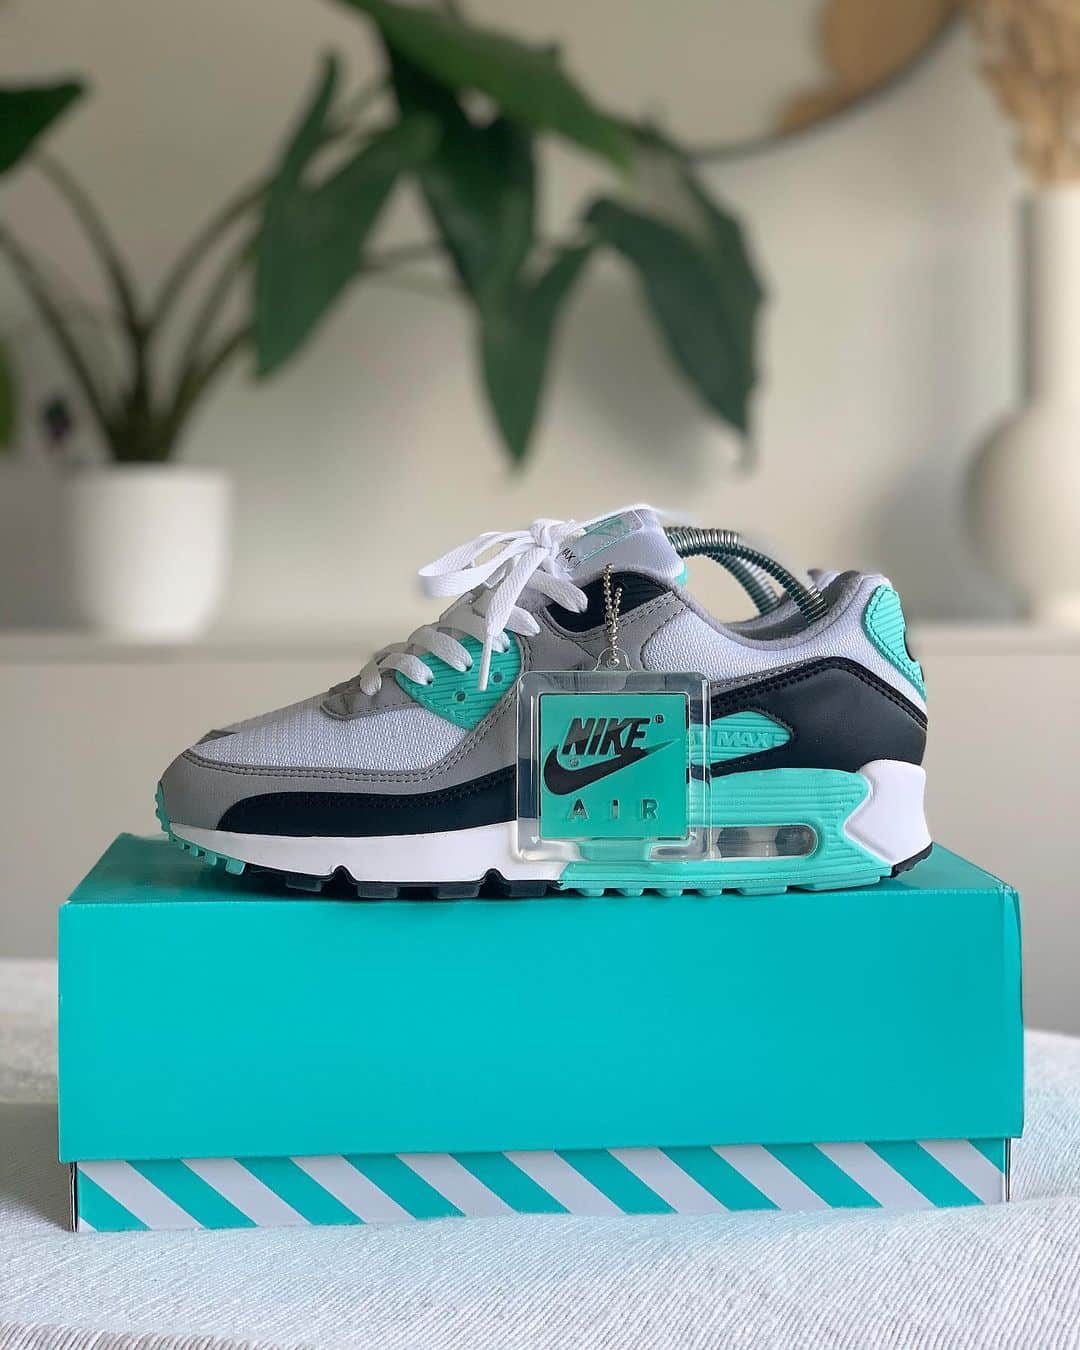 2020 Nike Air Max 90 Recrafted OG Turquoise Tiffany @gino.natar